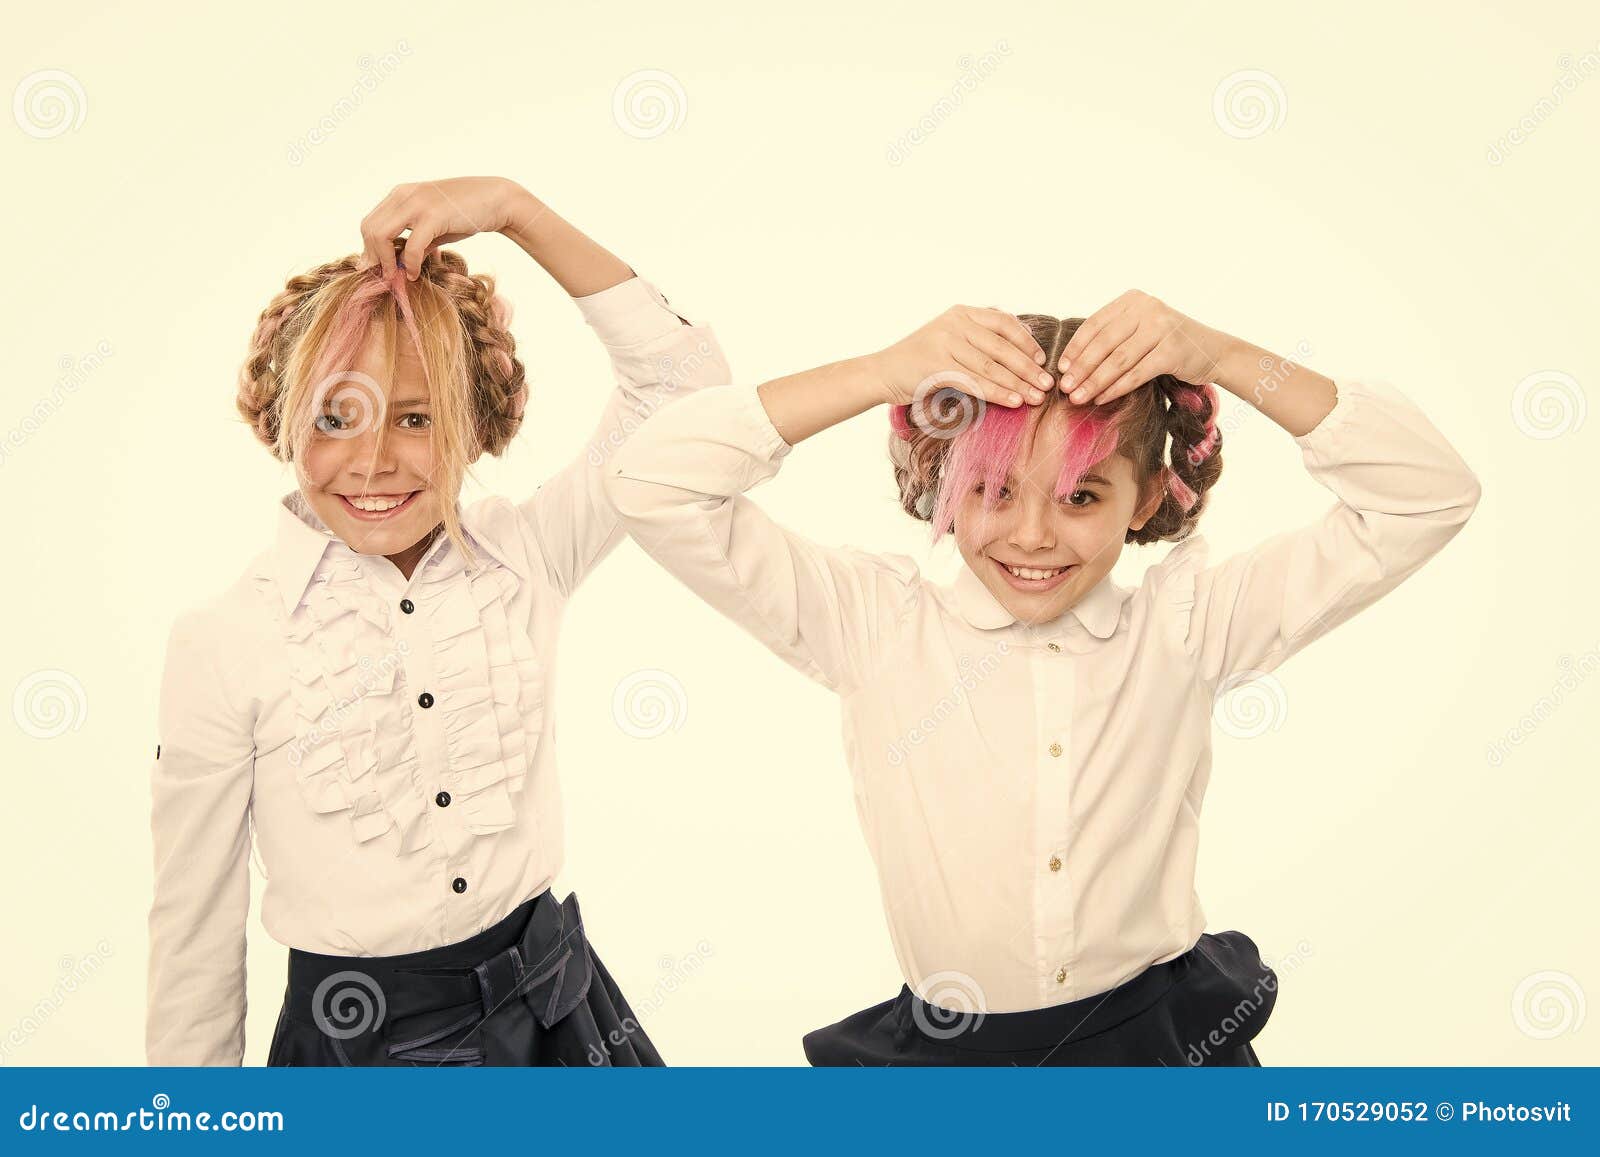 Fancy Hairstyles. Cute Little Children Styling Funny Hairstyles Isolated on  White Stock Photo - Image of antidruff, hairdo: 170529052